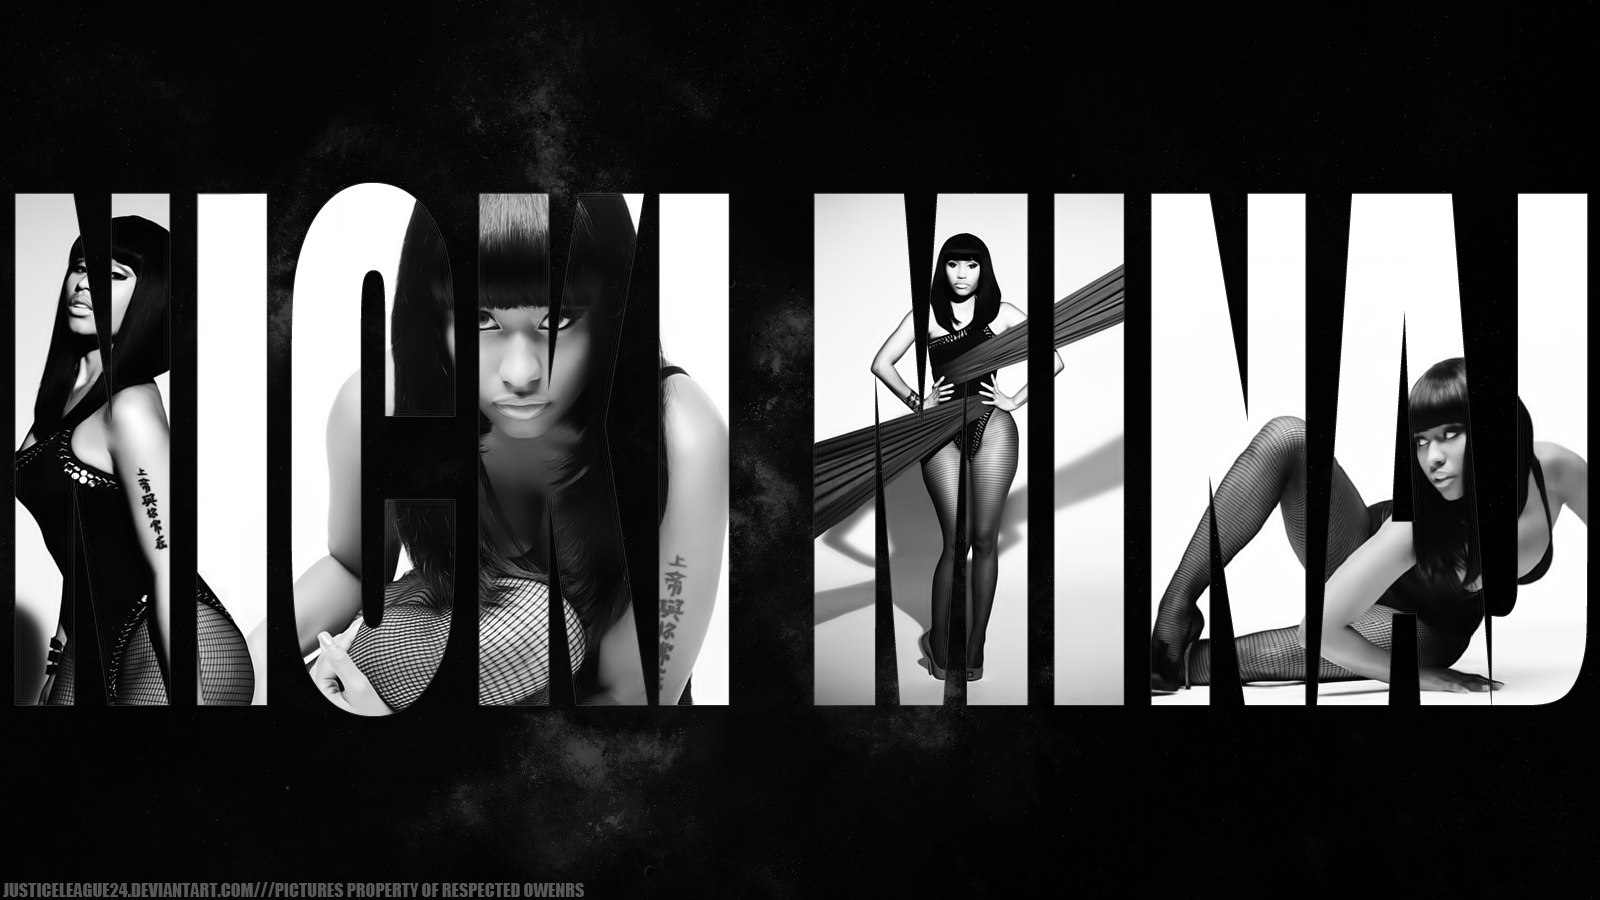 Download Nicki Minaj HD 20 background for your phone iPhone android 1600x900